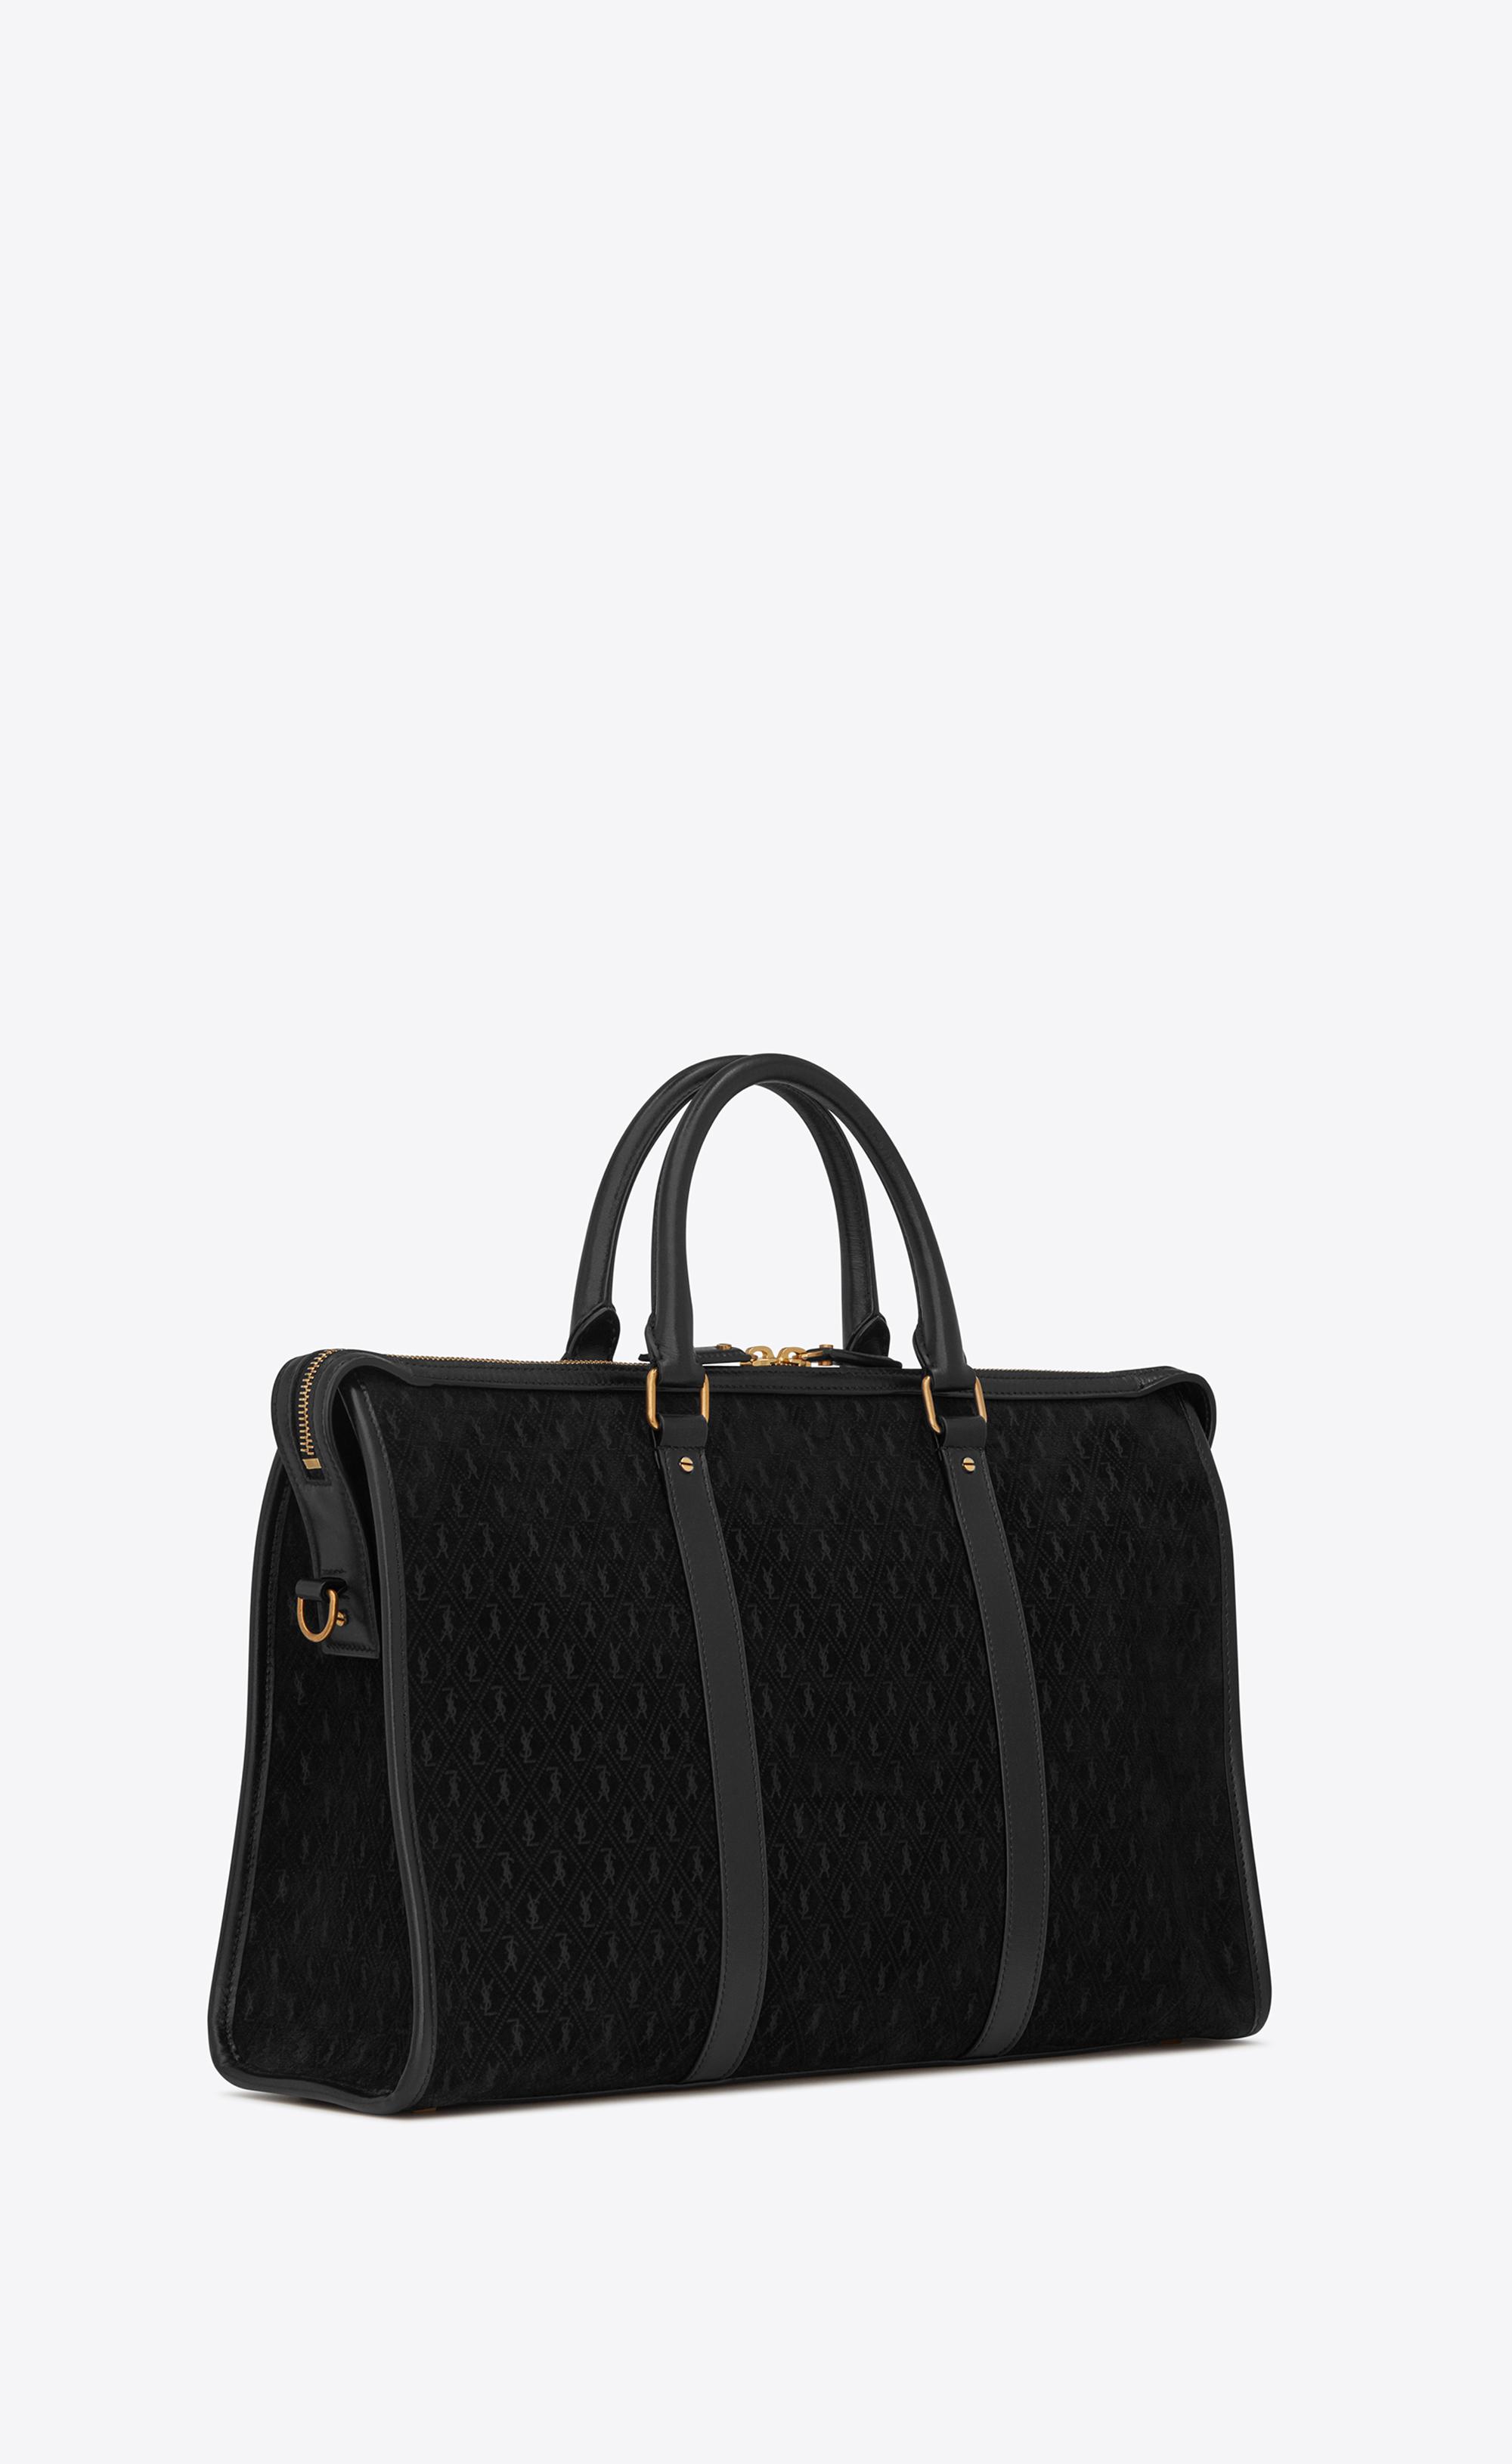 Naturally LV Duffle Bag by DaCre8iveOne